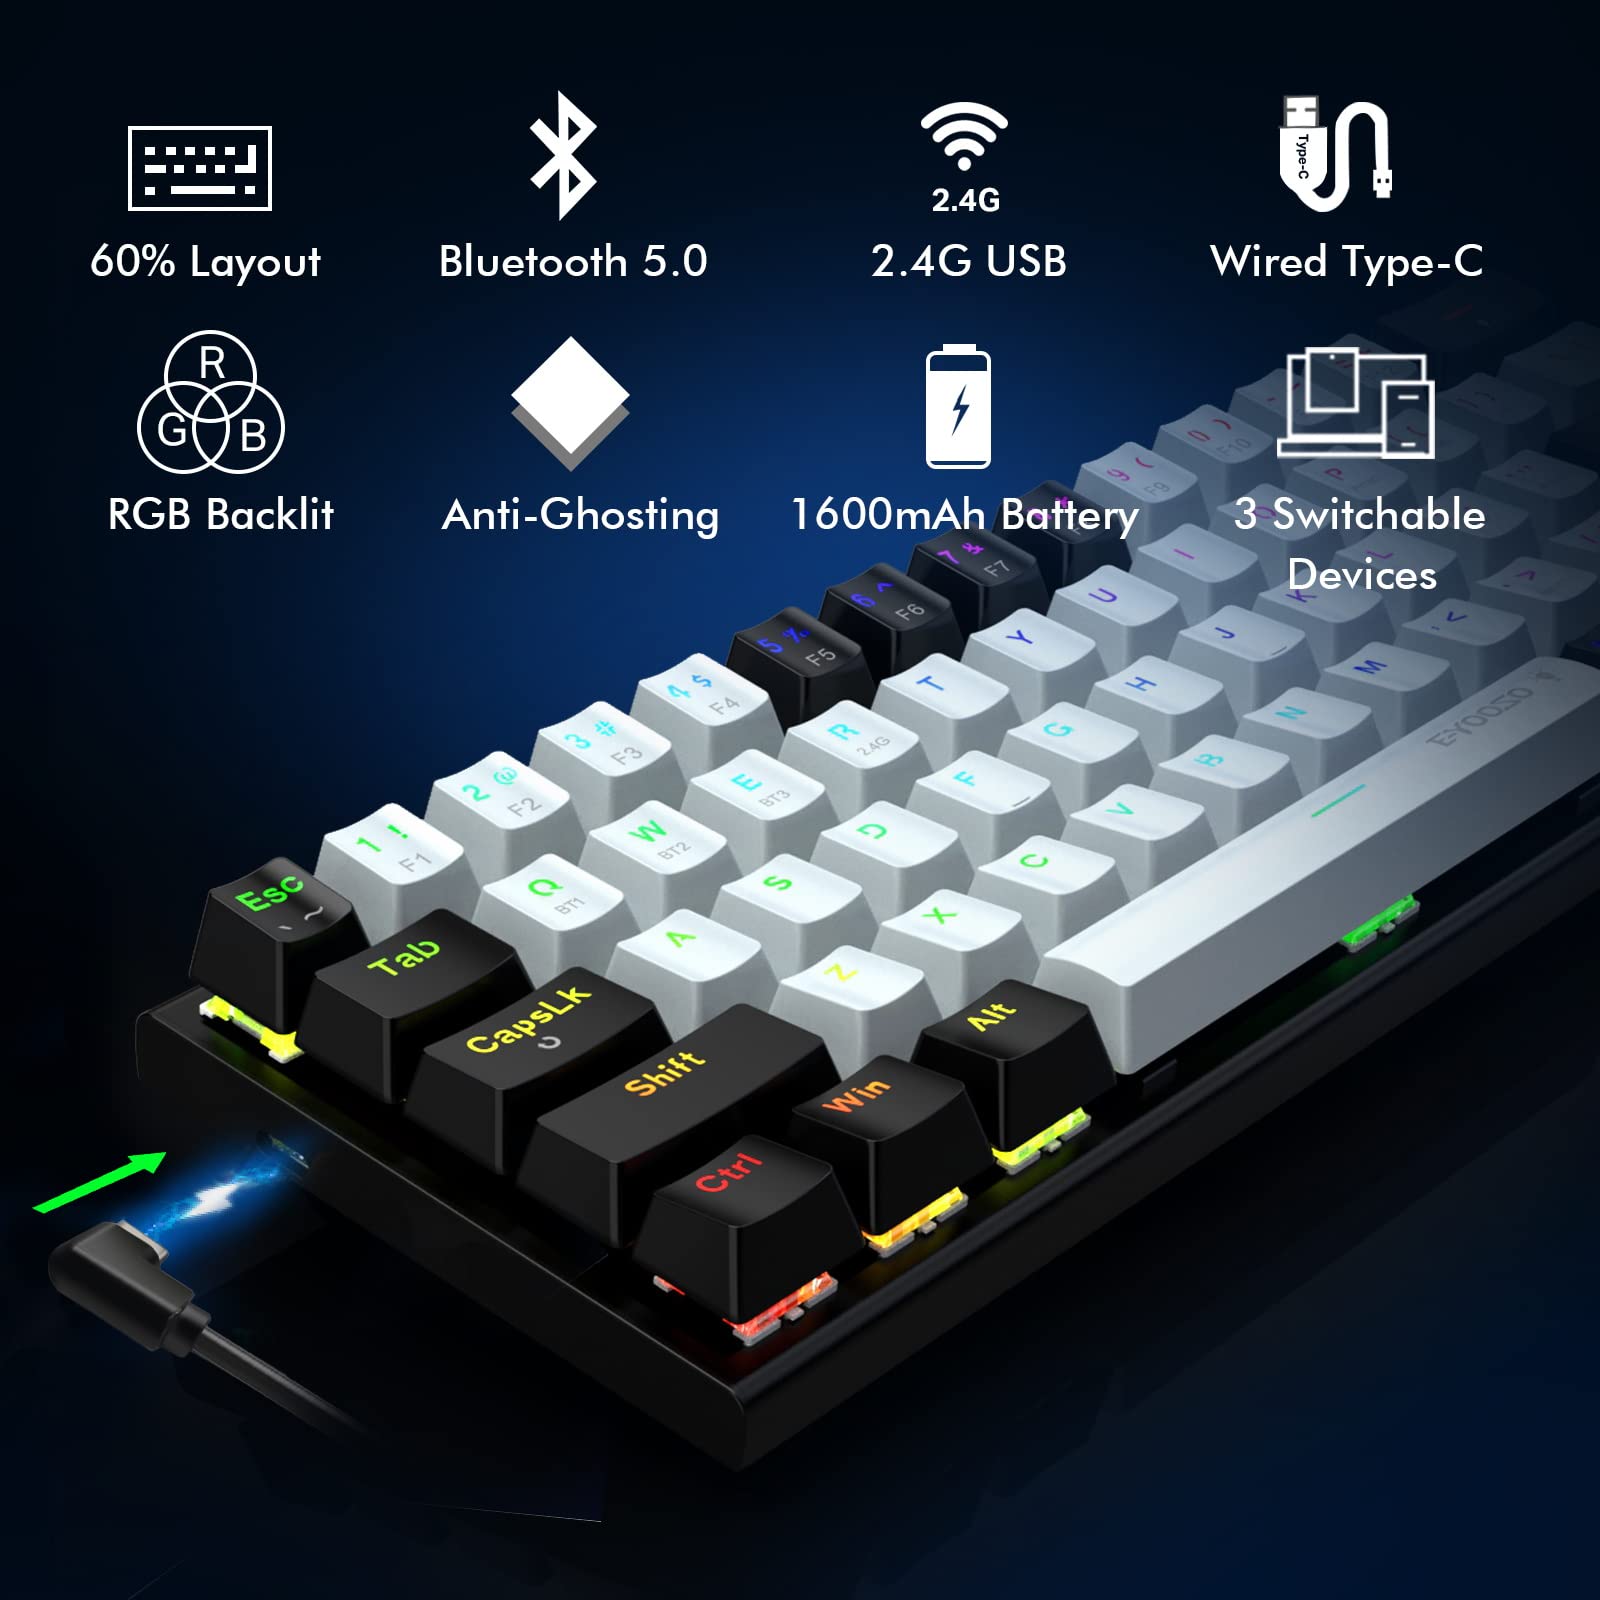 E-YOOSO Wireless Mechanical Keyboard, Bluetooth/2.4G/USB-C 60% Portable Rechargeable 63 Keys Gaming Keyboard, Compact RGB Hot Swappable Mechanical Keyboard with Linear Red Switches for Windows/Mac